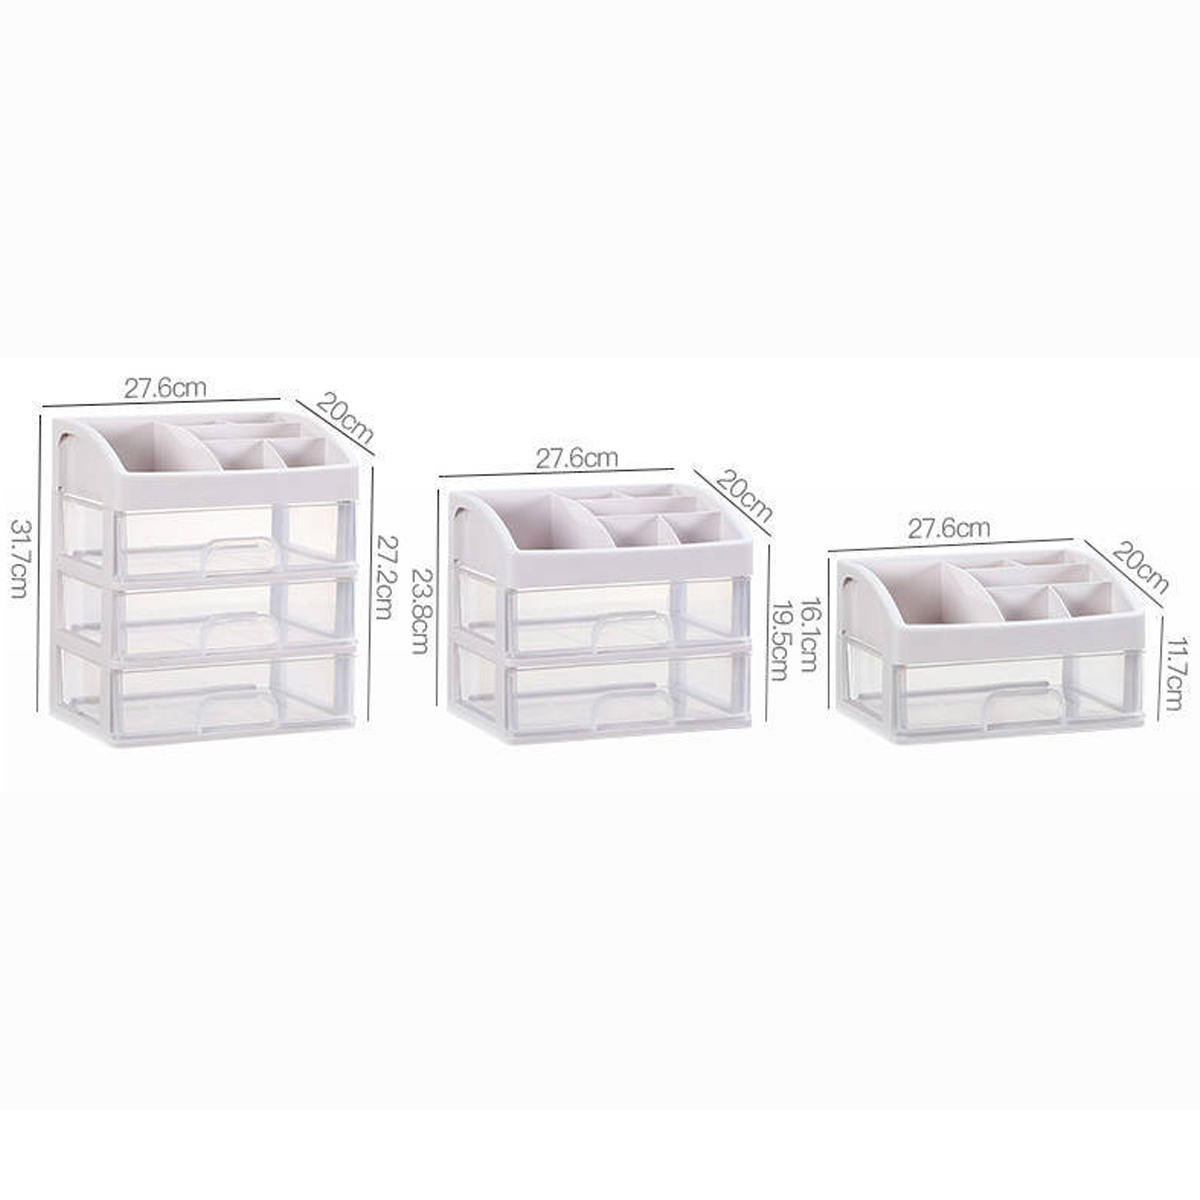 Large-Multipurpose-Makeup-Cosmetic-Jewelry-Storage-Box-Drawer-Organizer-Case-Display-for-Dormitory-B-1700562-8